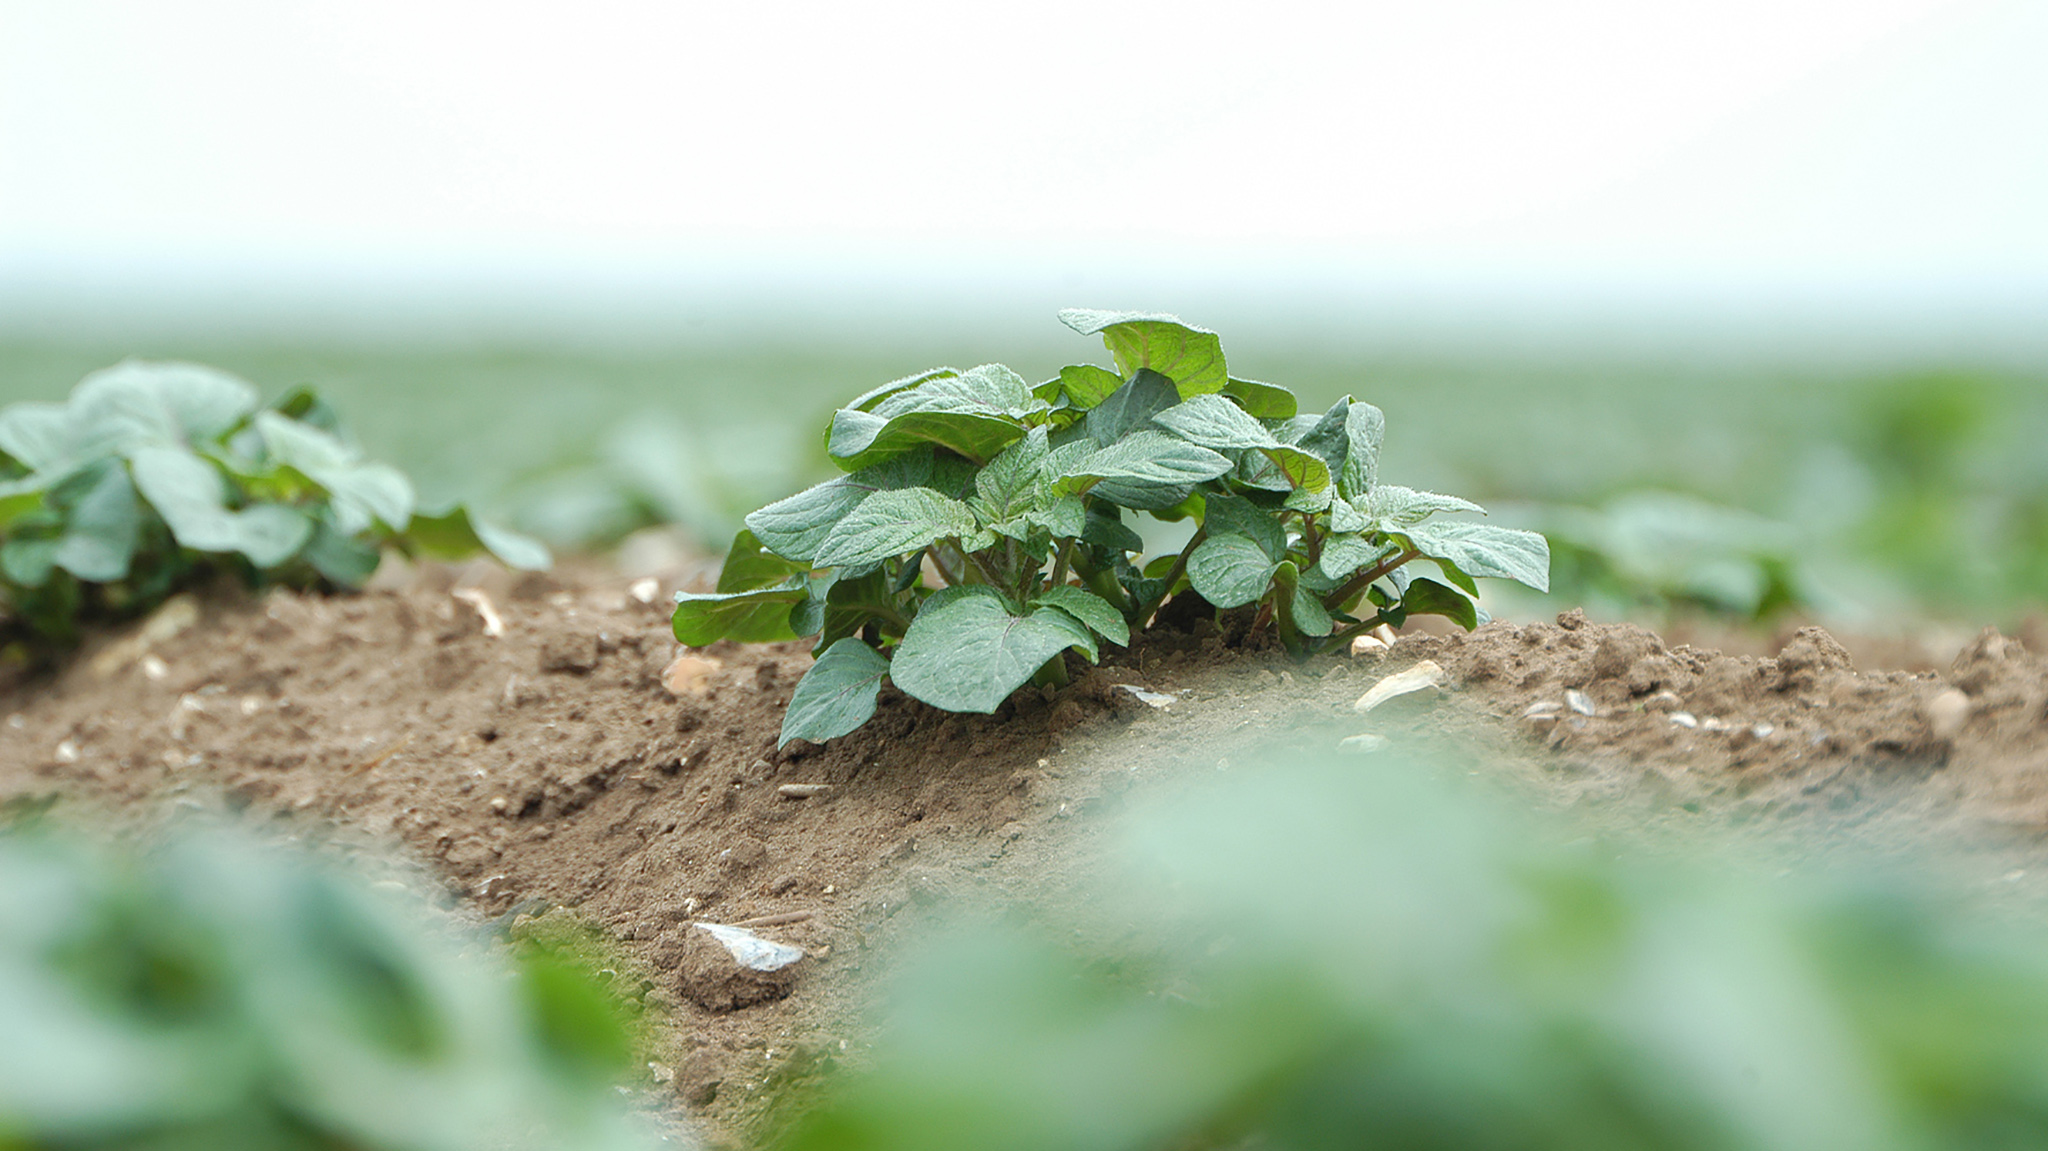 This agronomic image shows young potatoes.